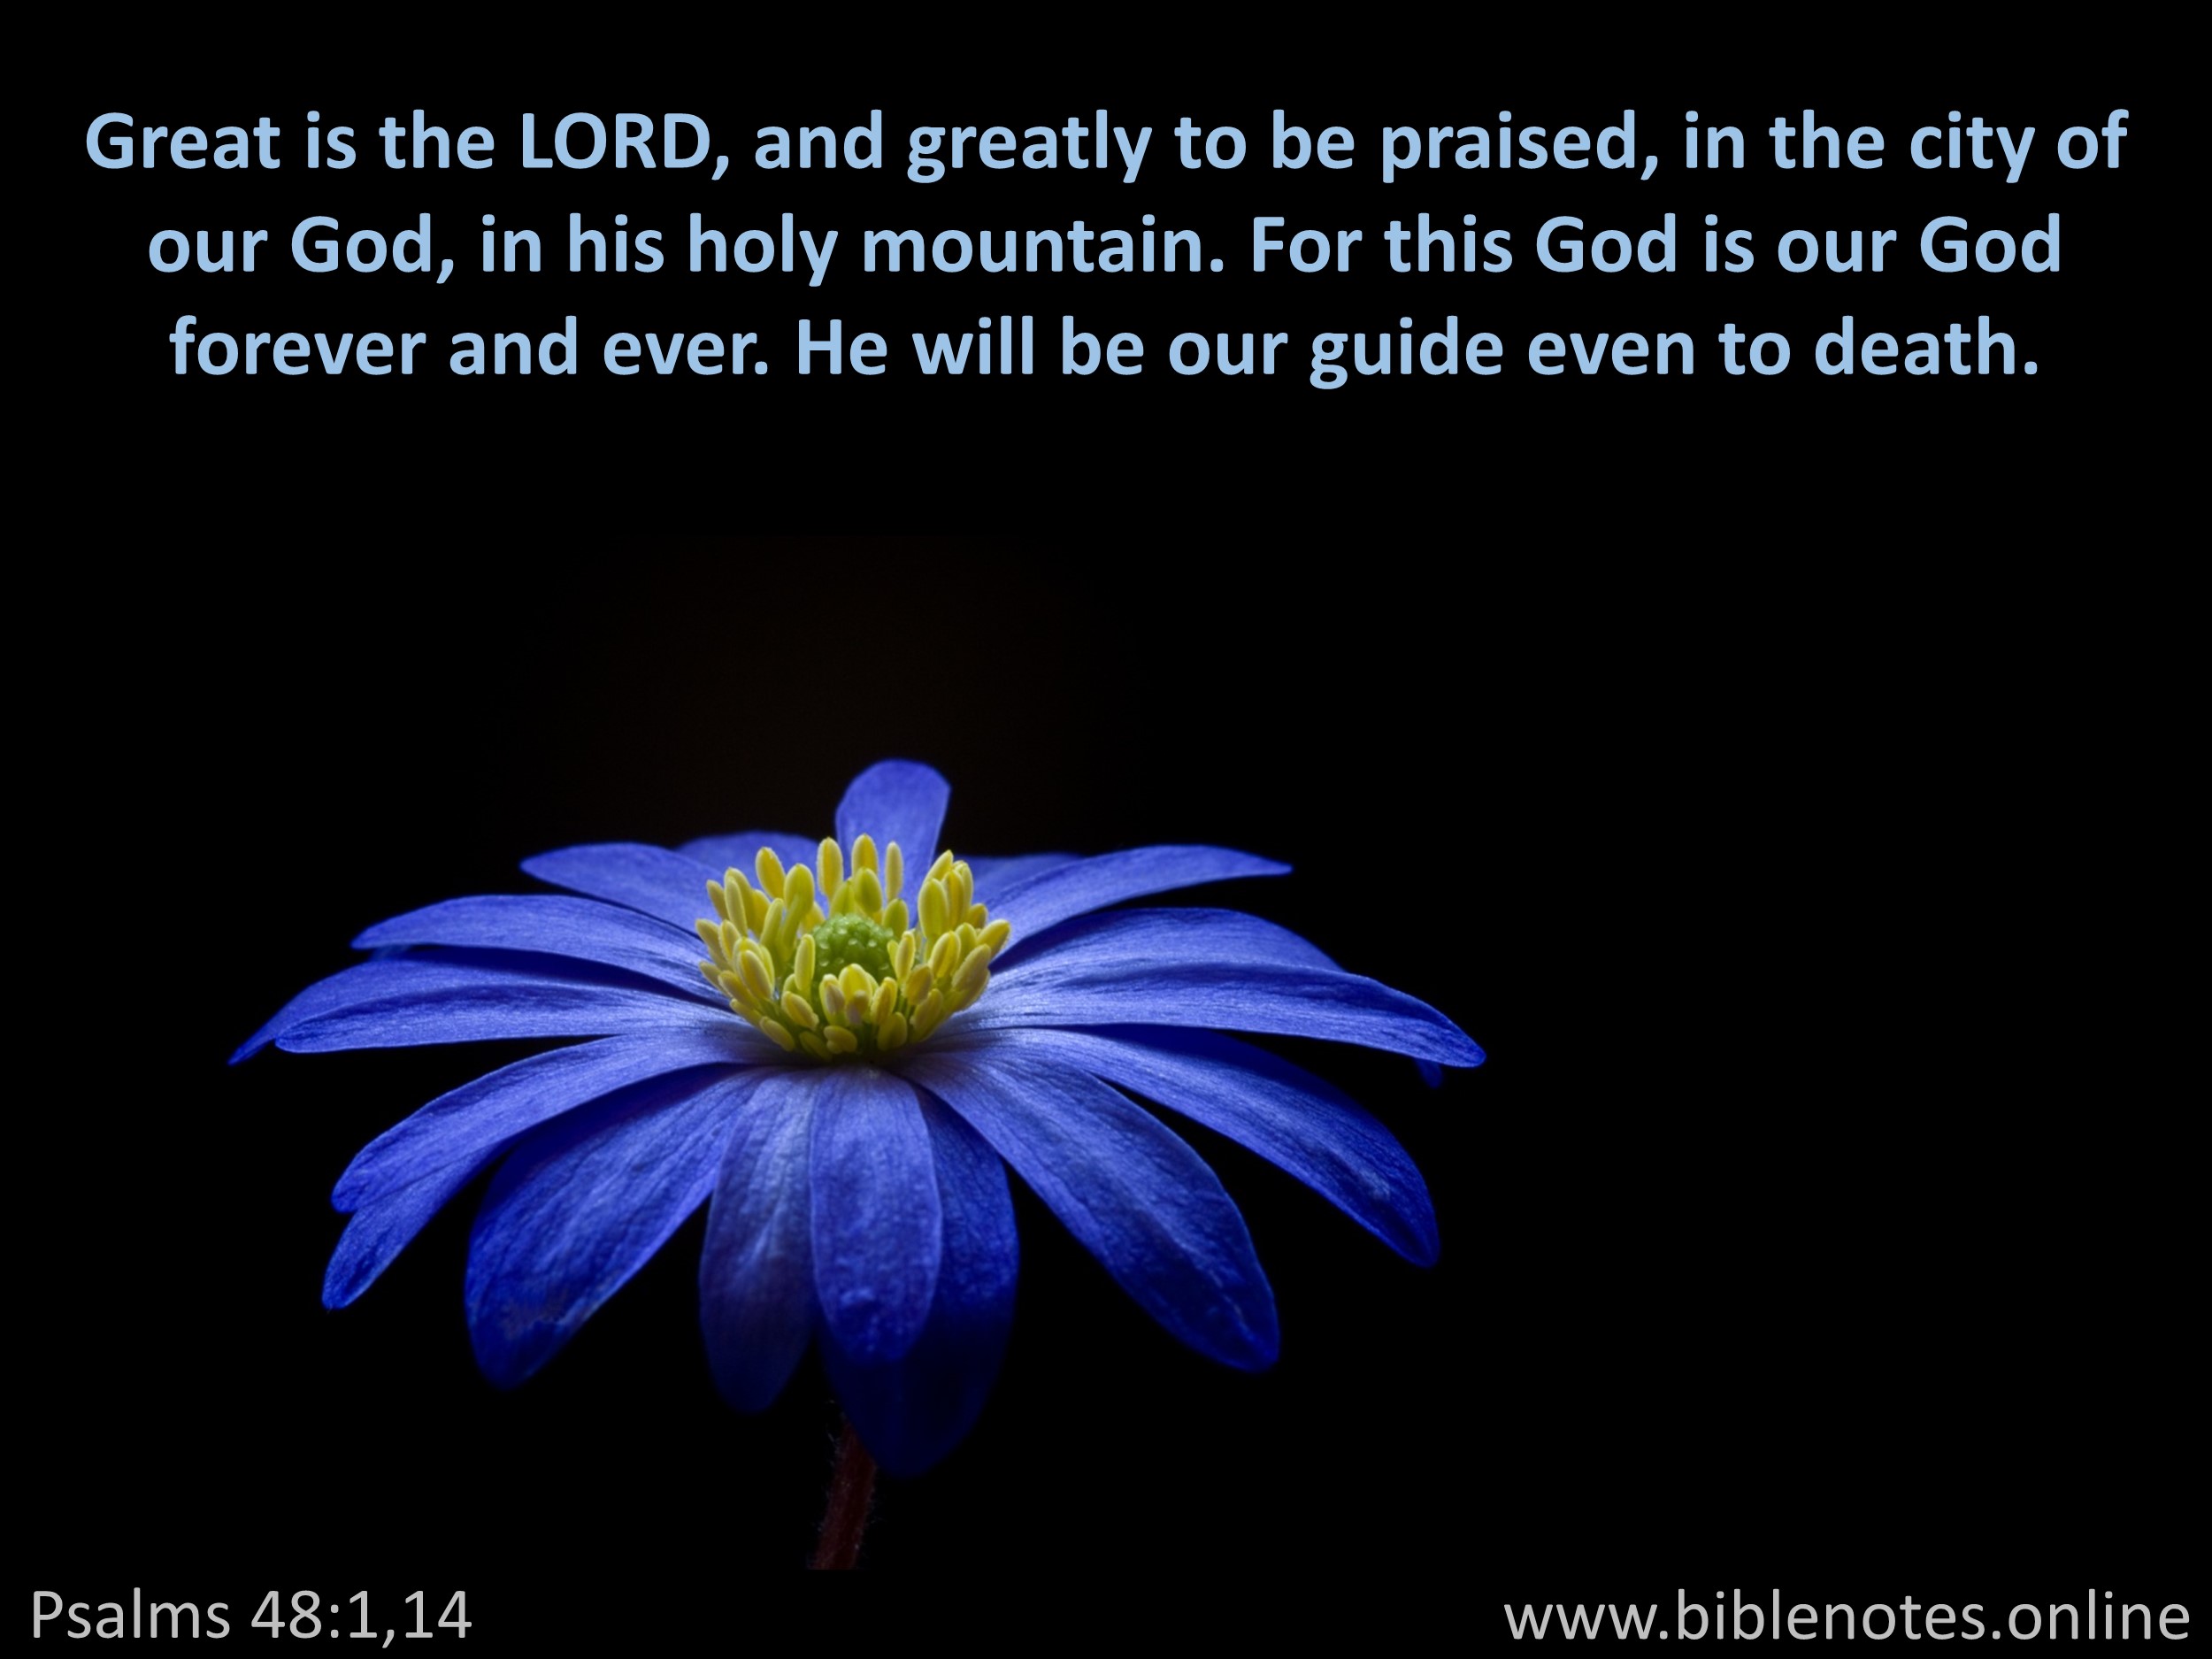 Bible Verse from Psalms Chapter 48